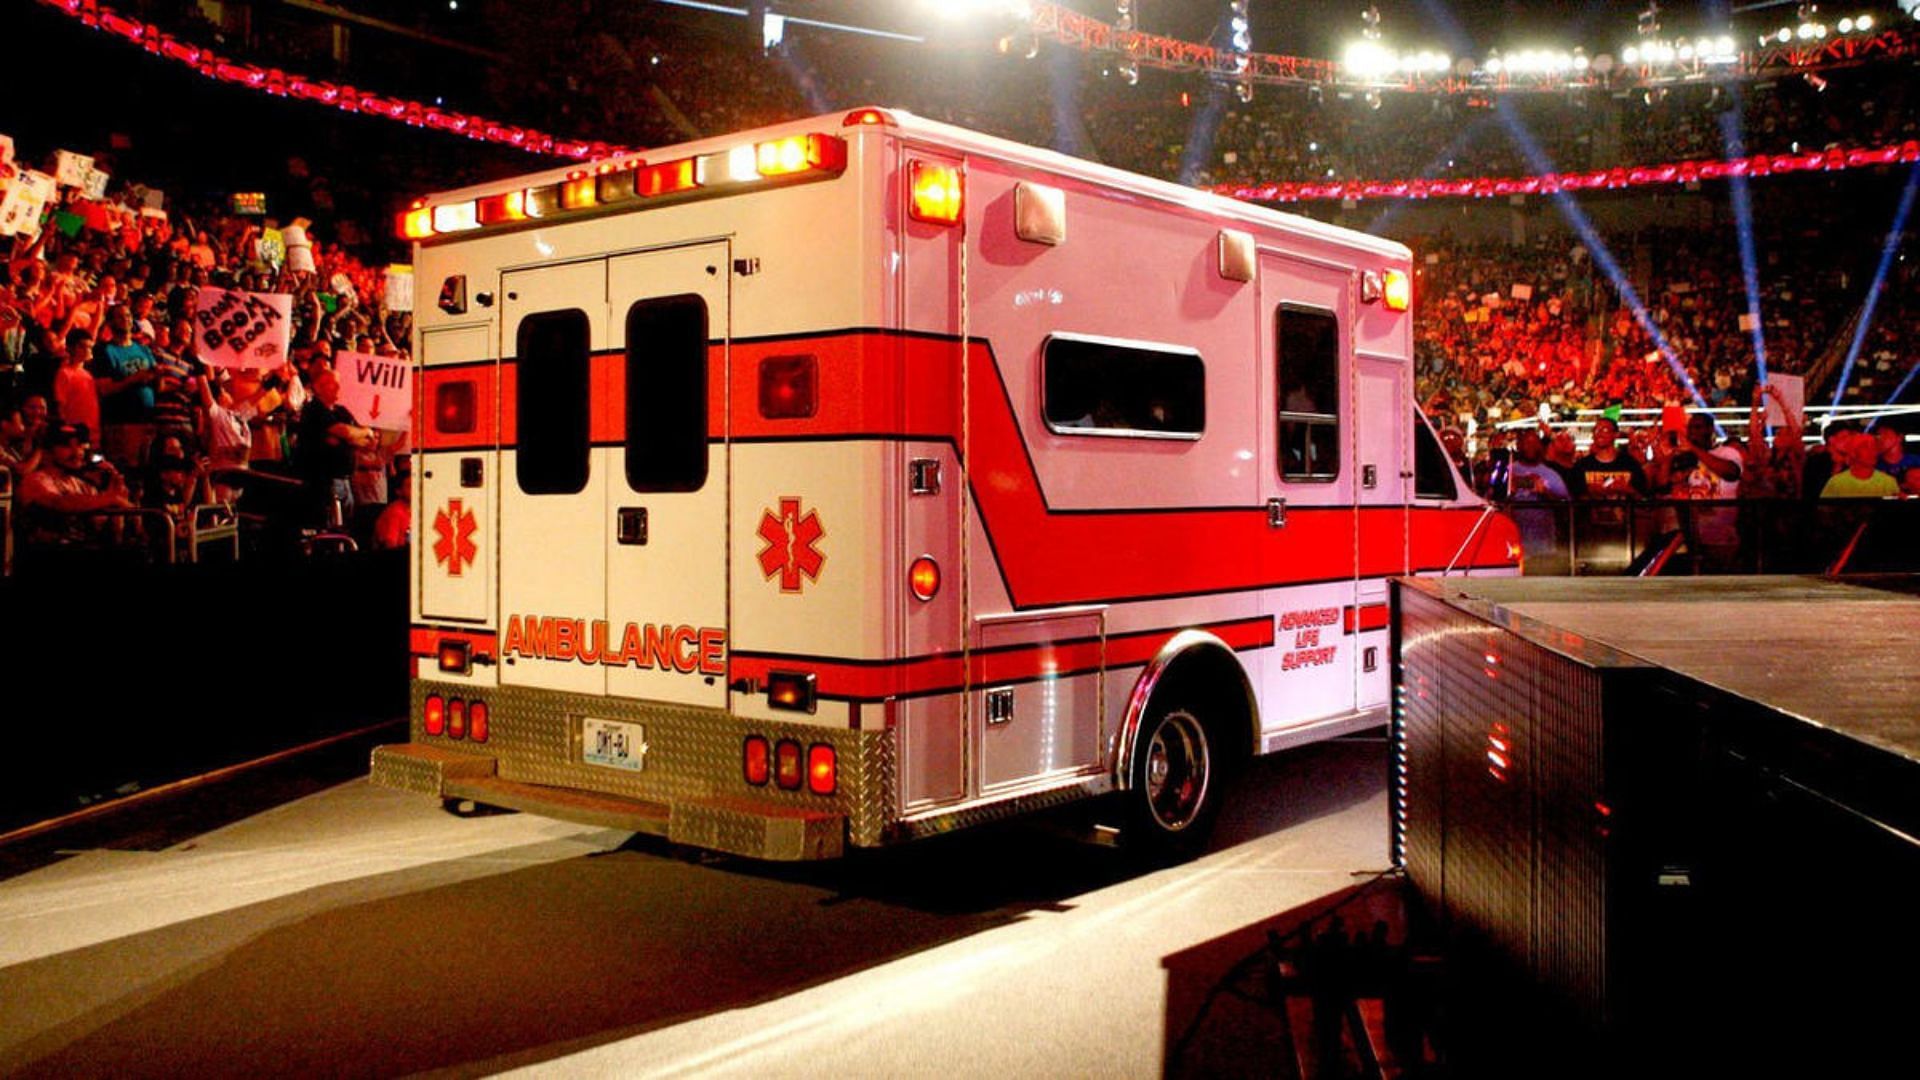 Find out which WWE Superstar is hospitalized?